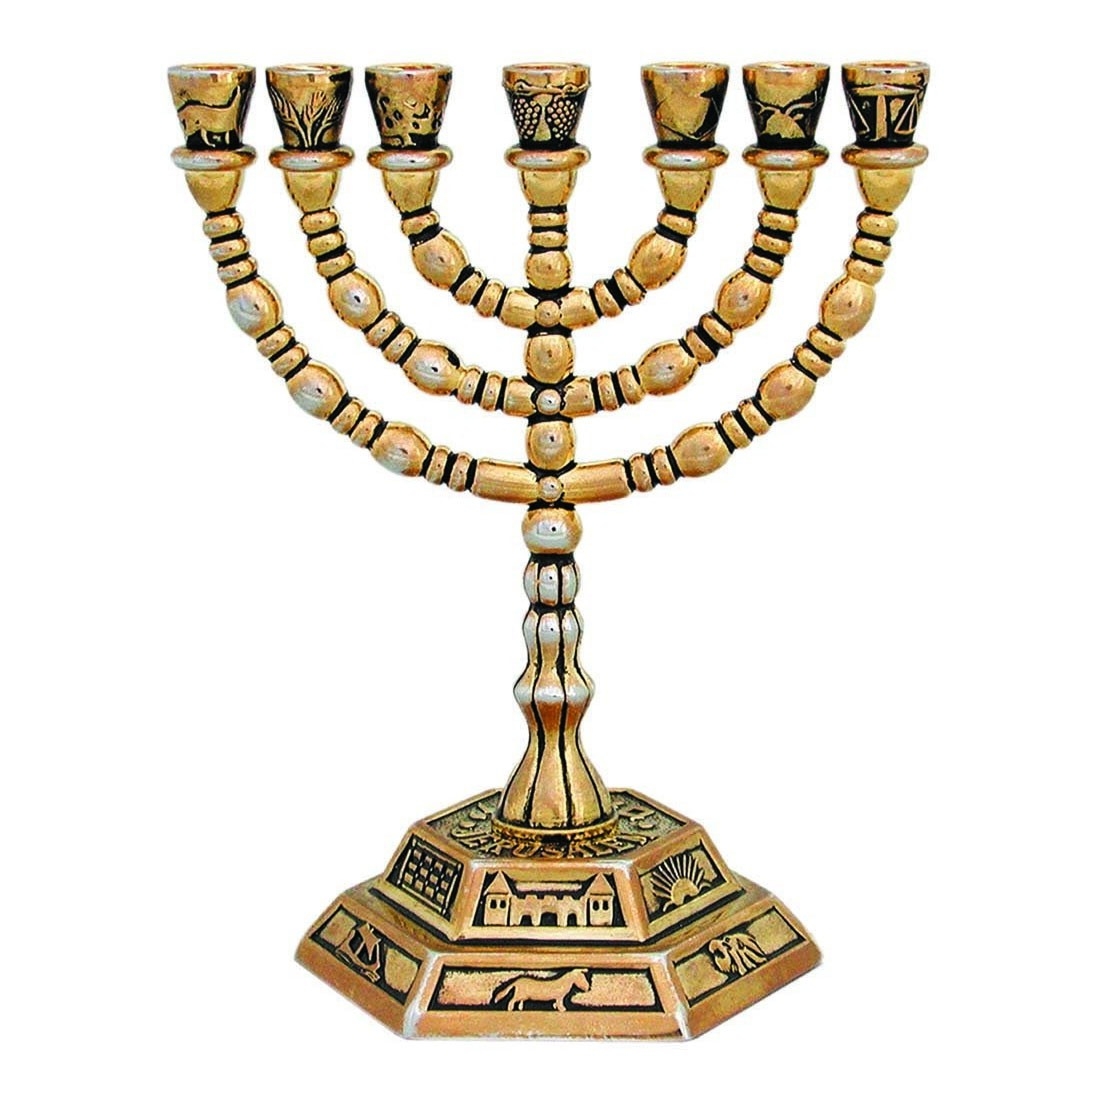 Miniature Gold Colored 12 Tribes 7-Branched Menorah - 1